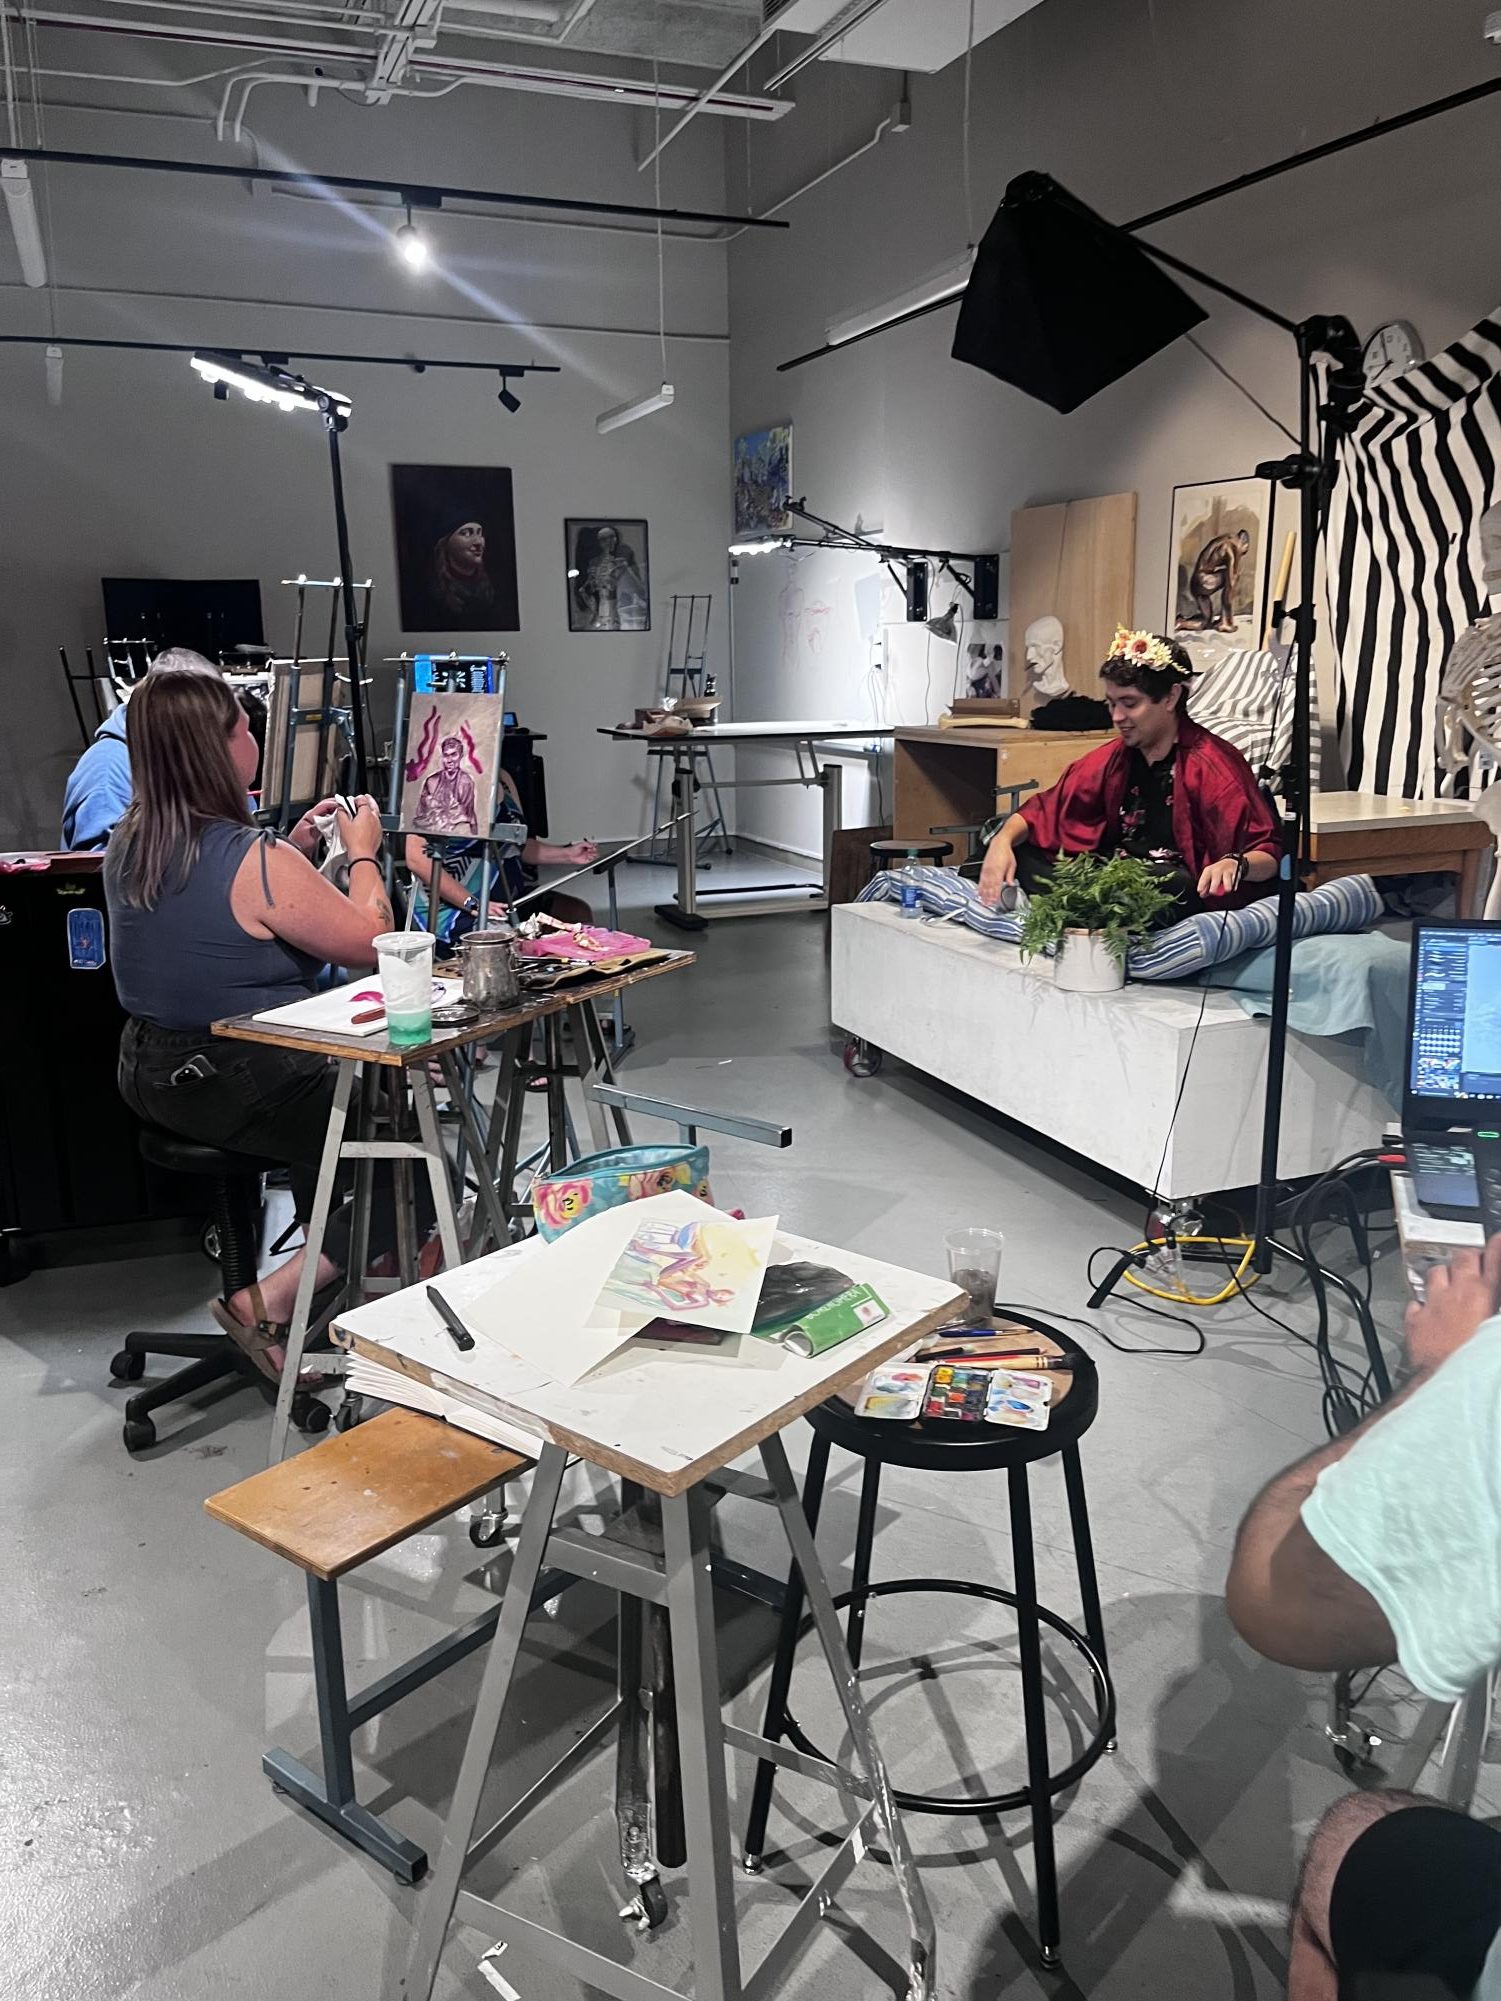 Students and staff take part in the UNG Art Collective’s Paint Night on Oct. 5. The collective hosts the event every Thursday evening starting around 6 p.m